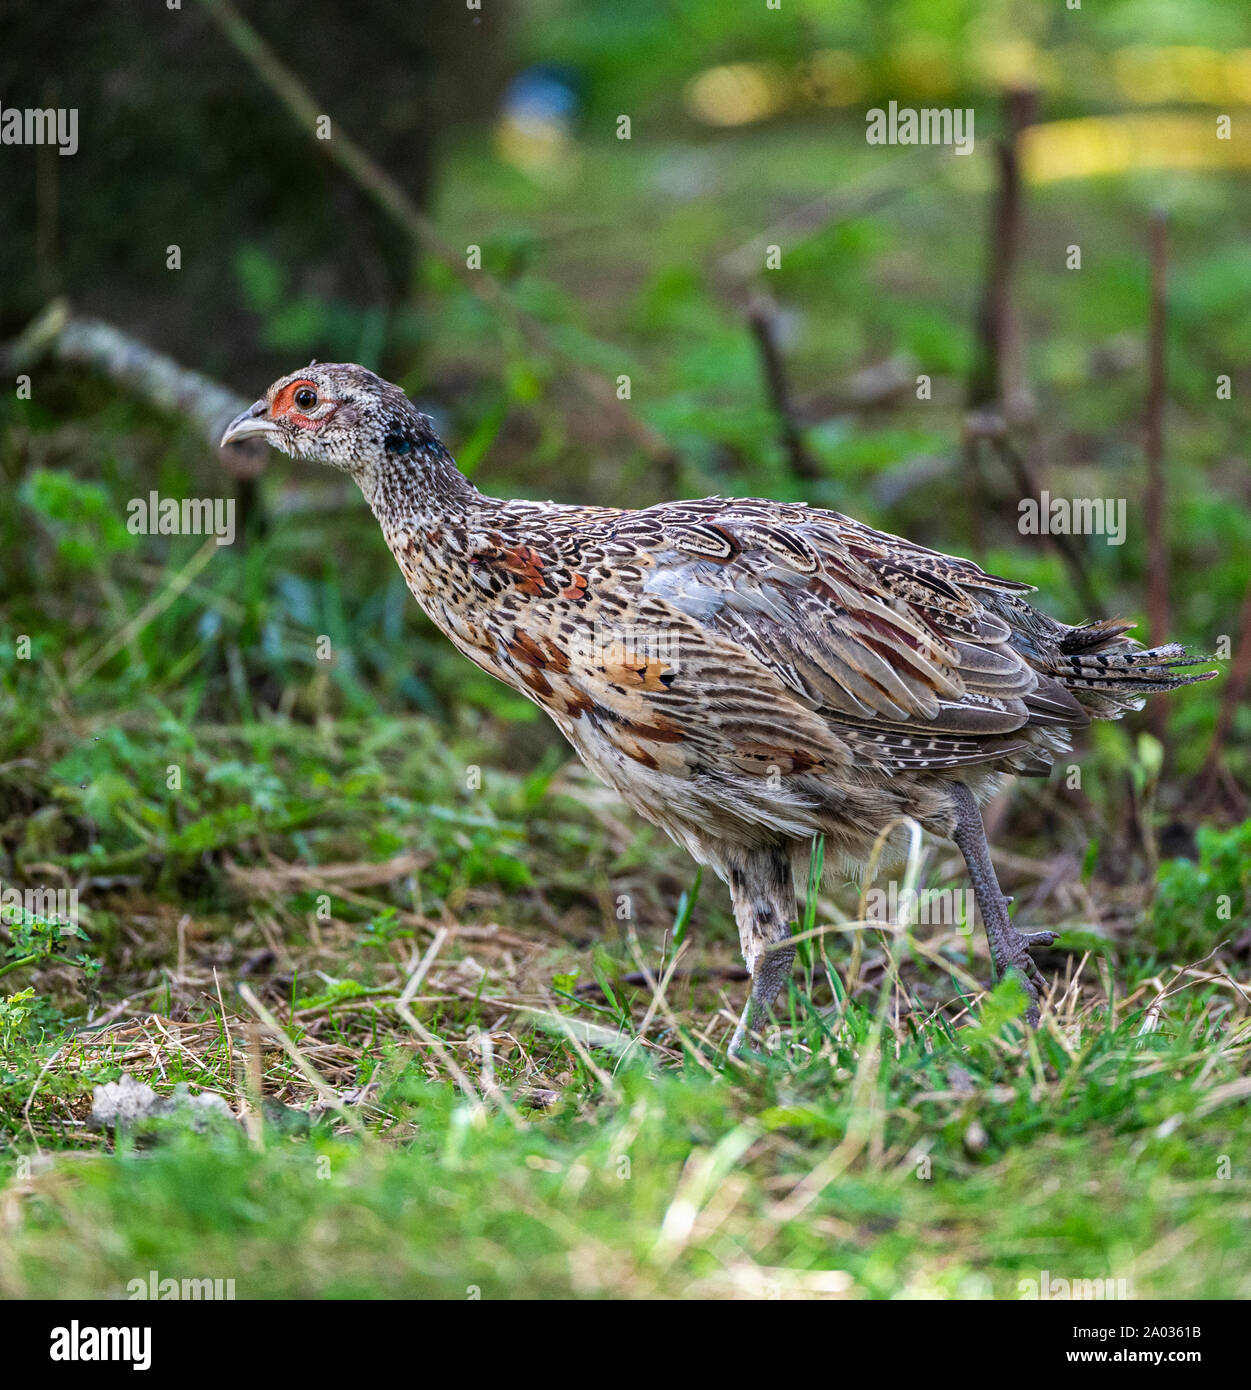 Ten week old pheasant chicks, (Phasianus colchicus) often known as poults, after being released into a gamekeepers release pen on an English estate Stock Photo